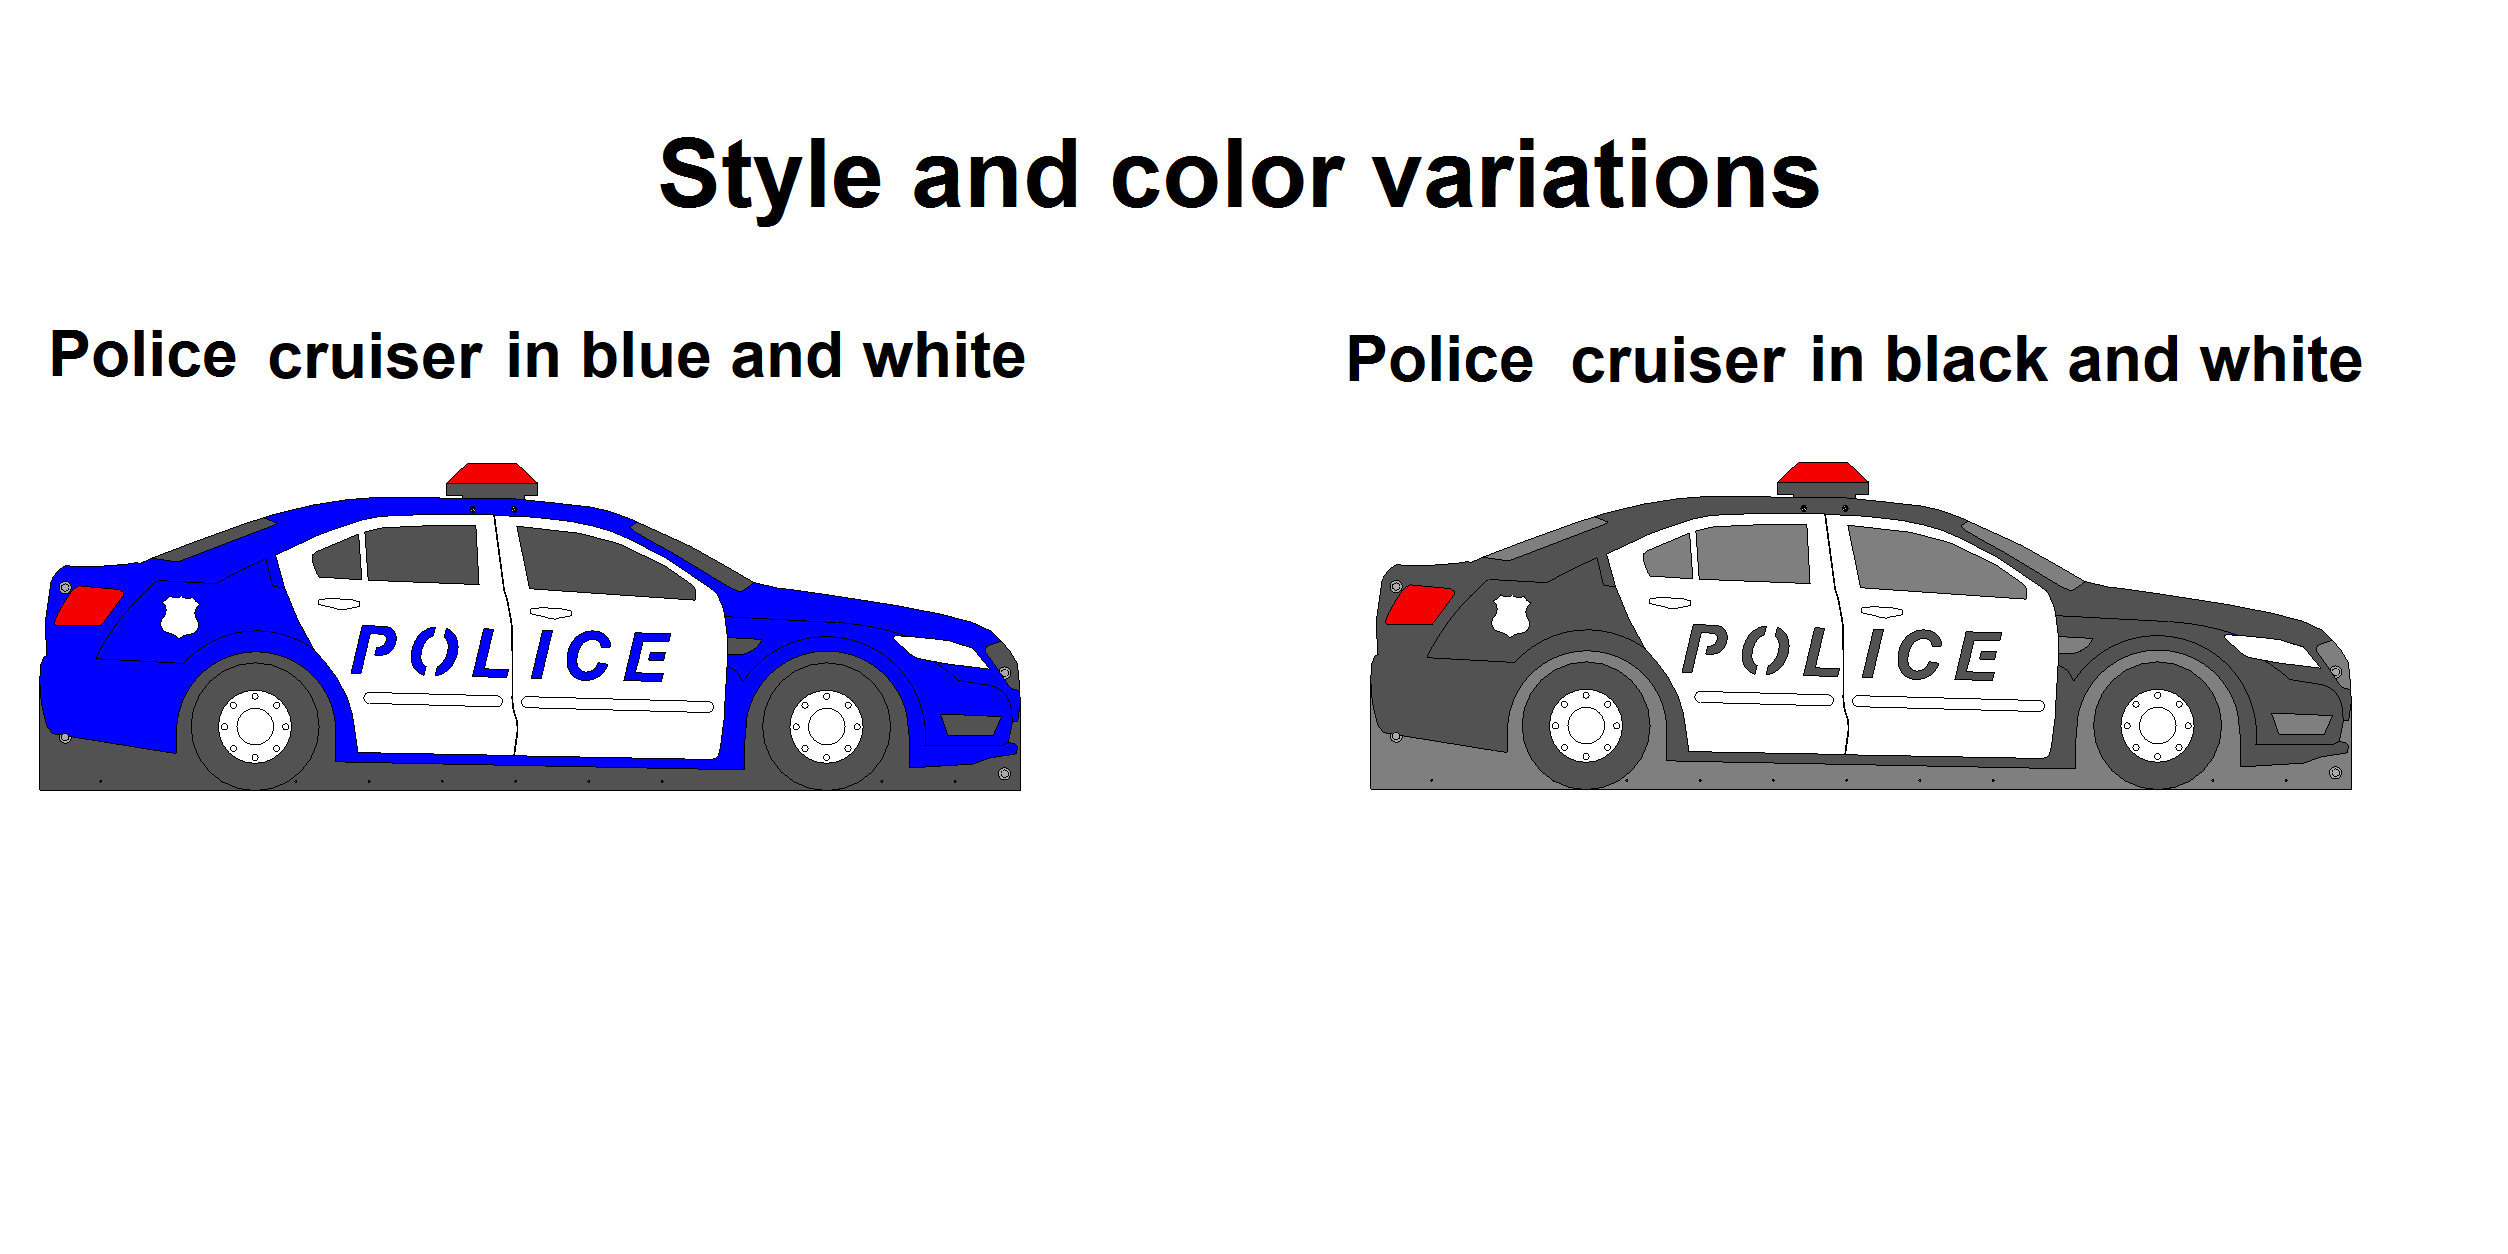 police cruiser bed options